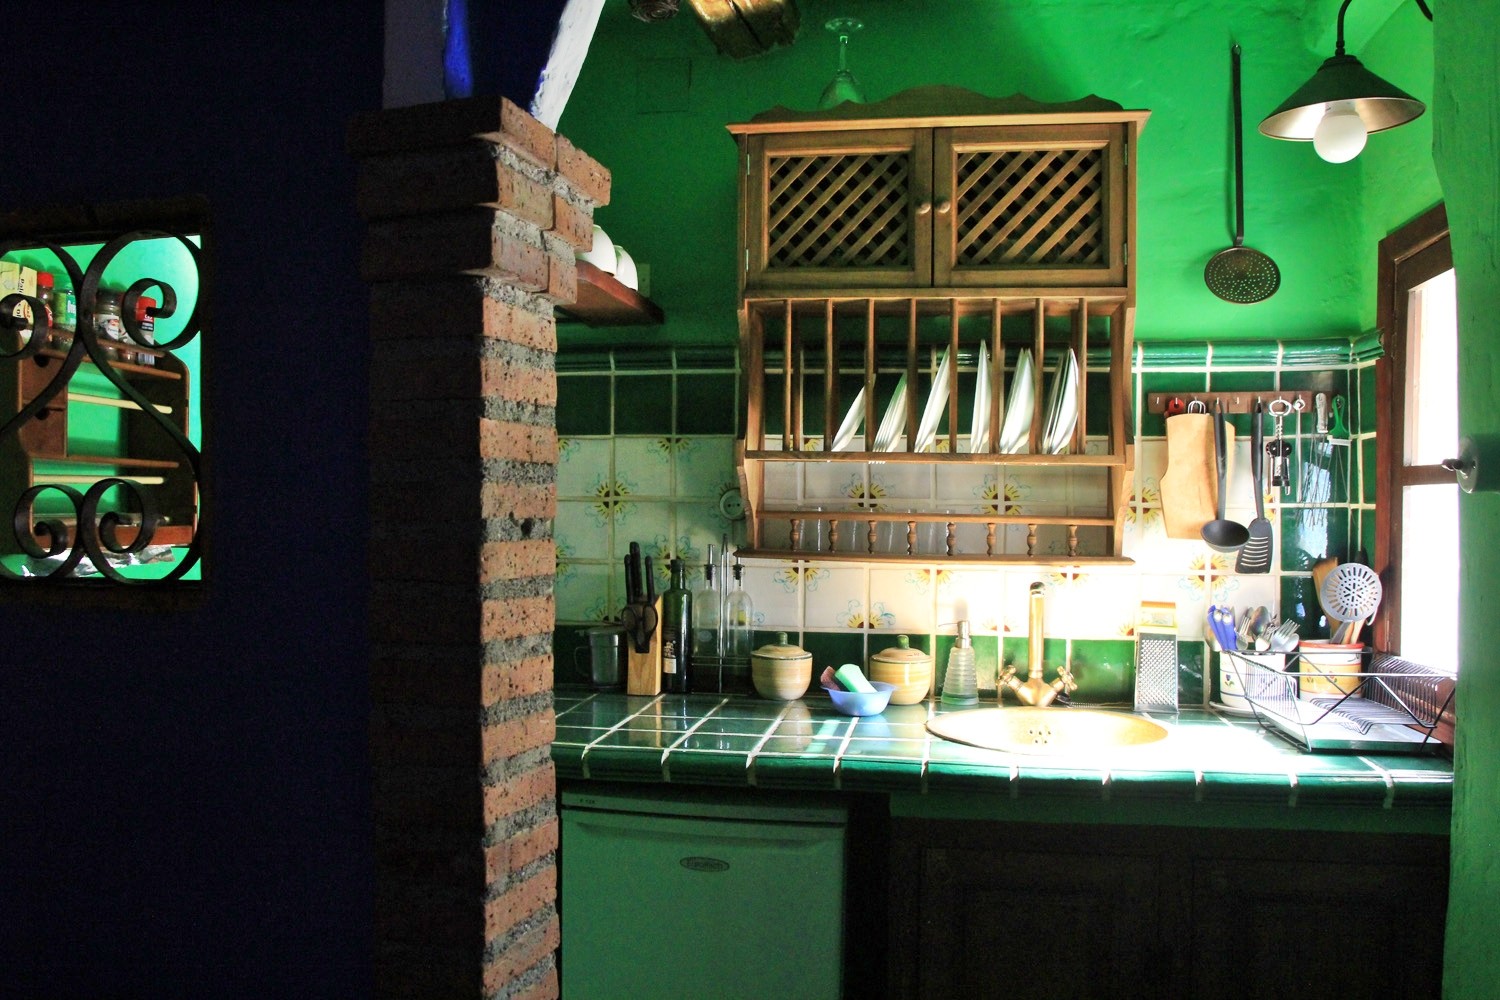 View to the kitchen